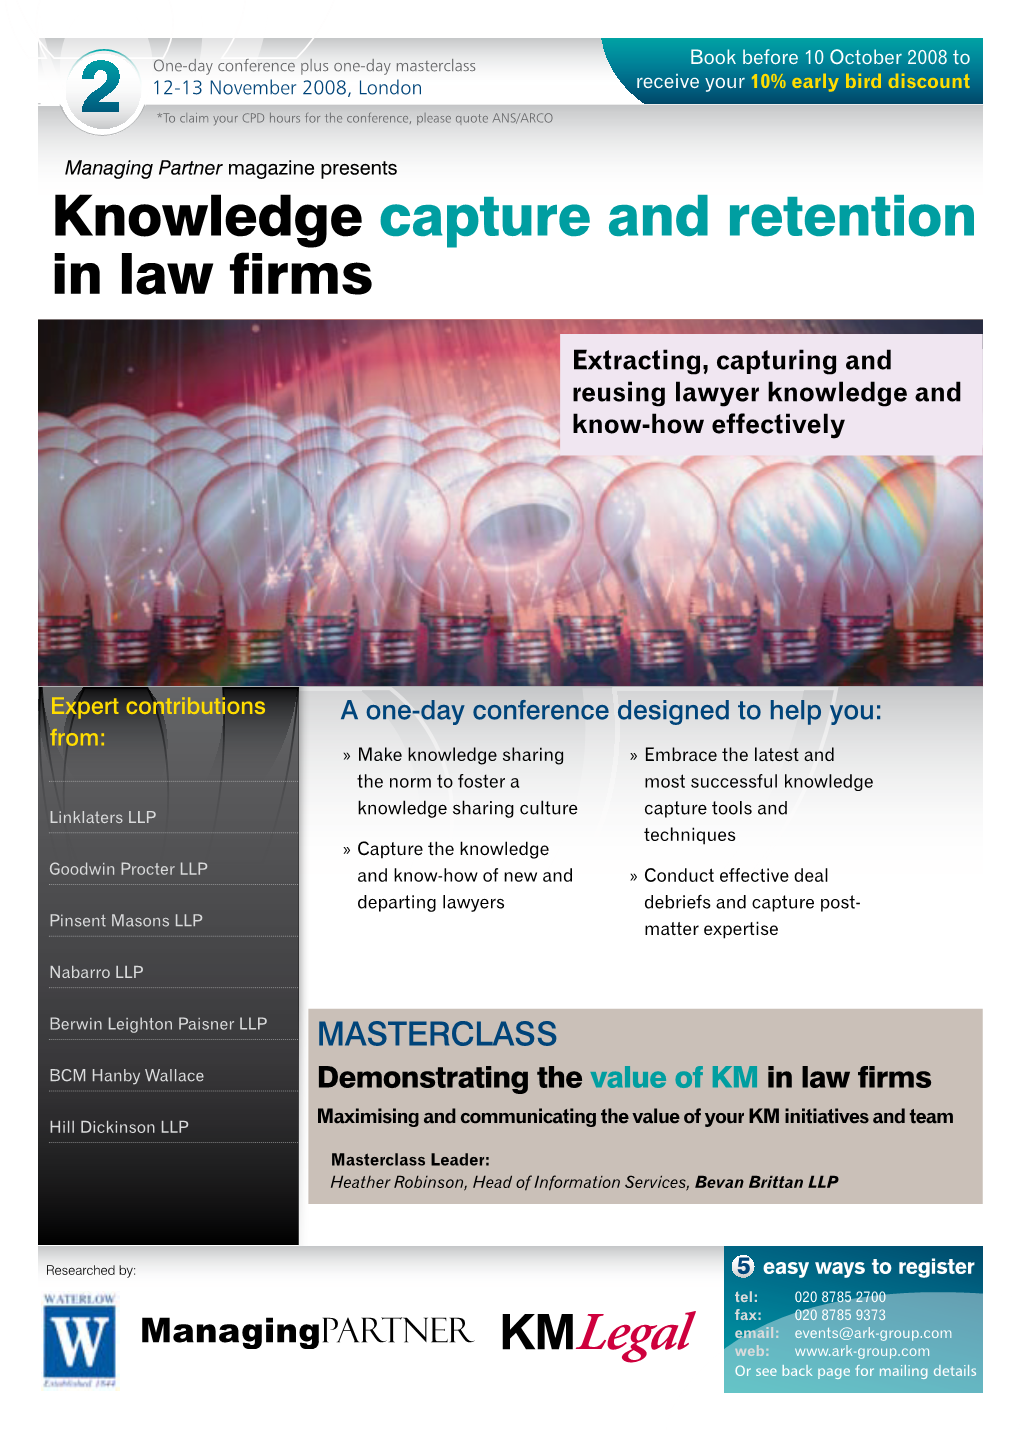 Knowledge Capture and Retention in Law Firms